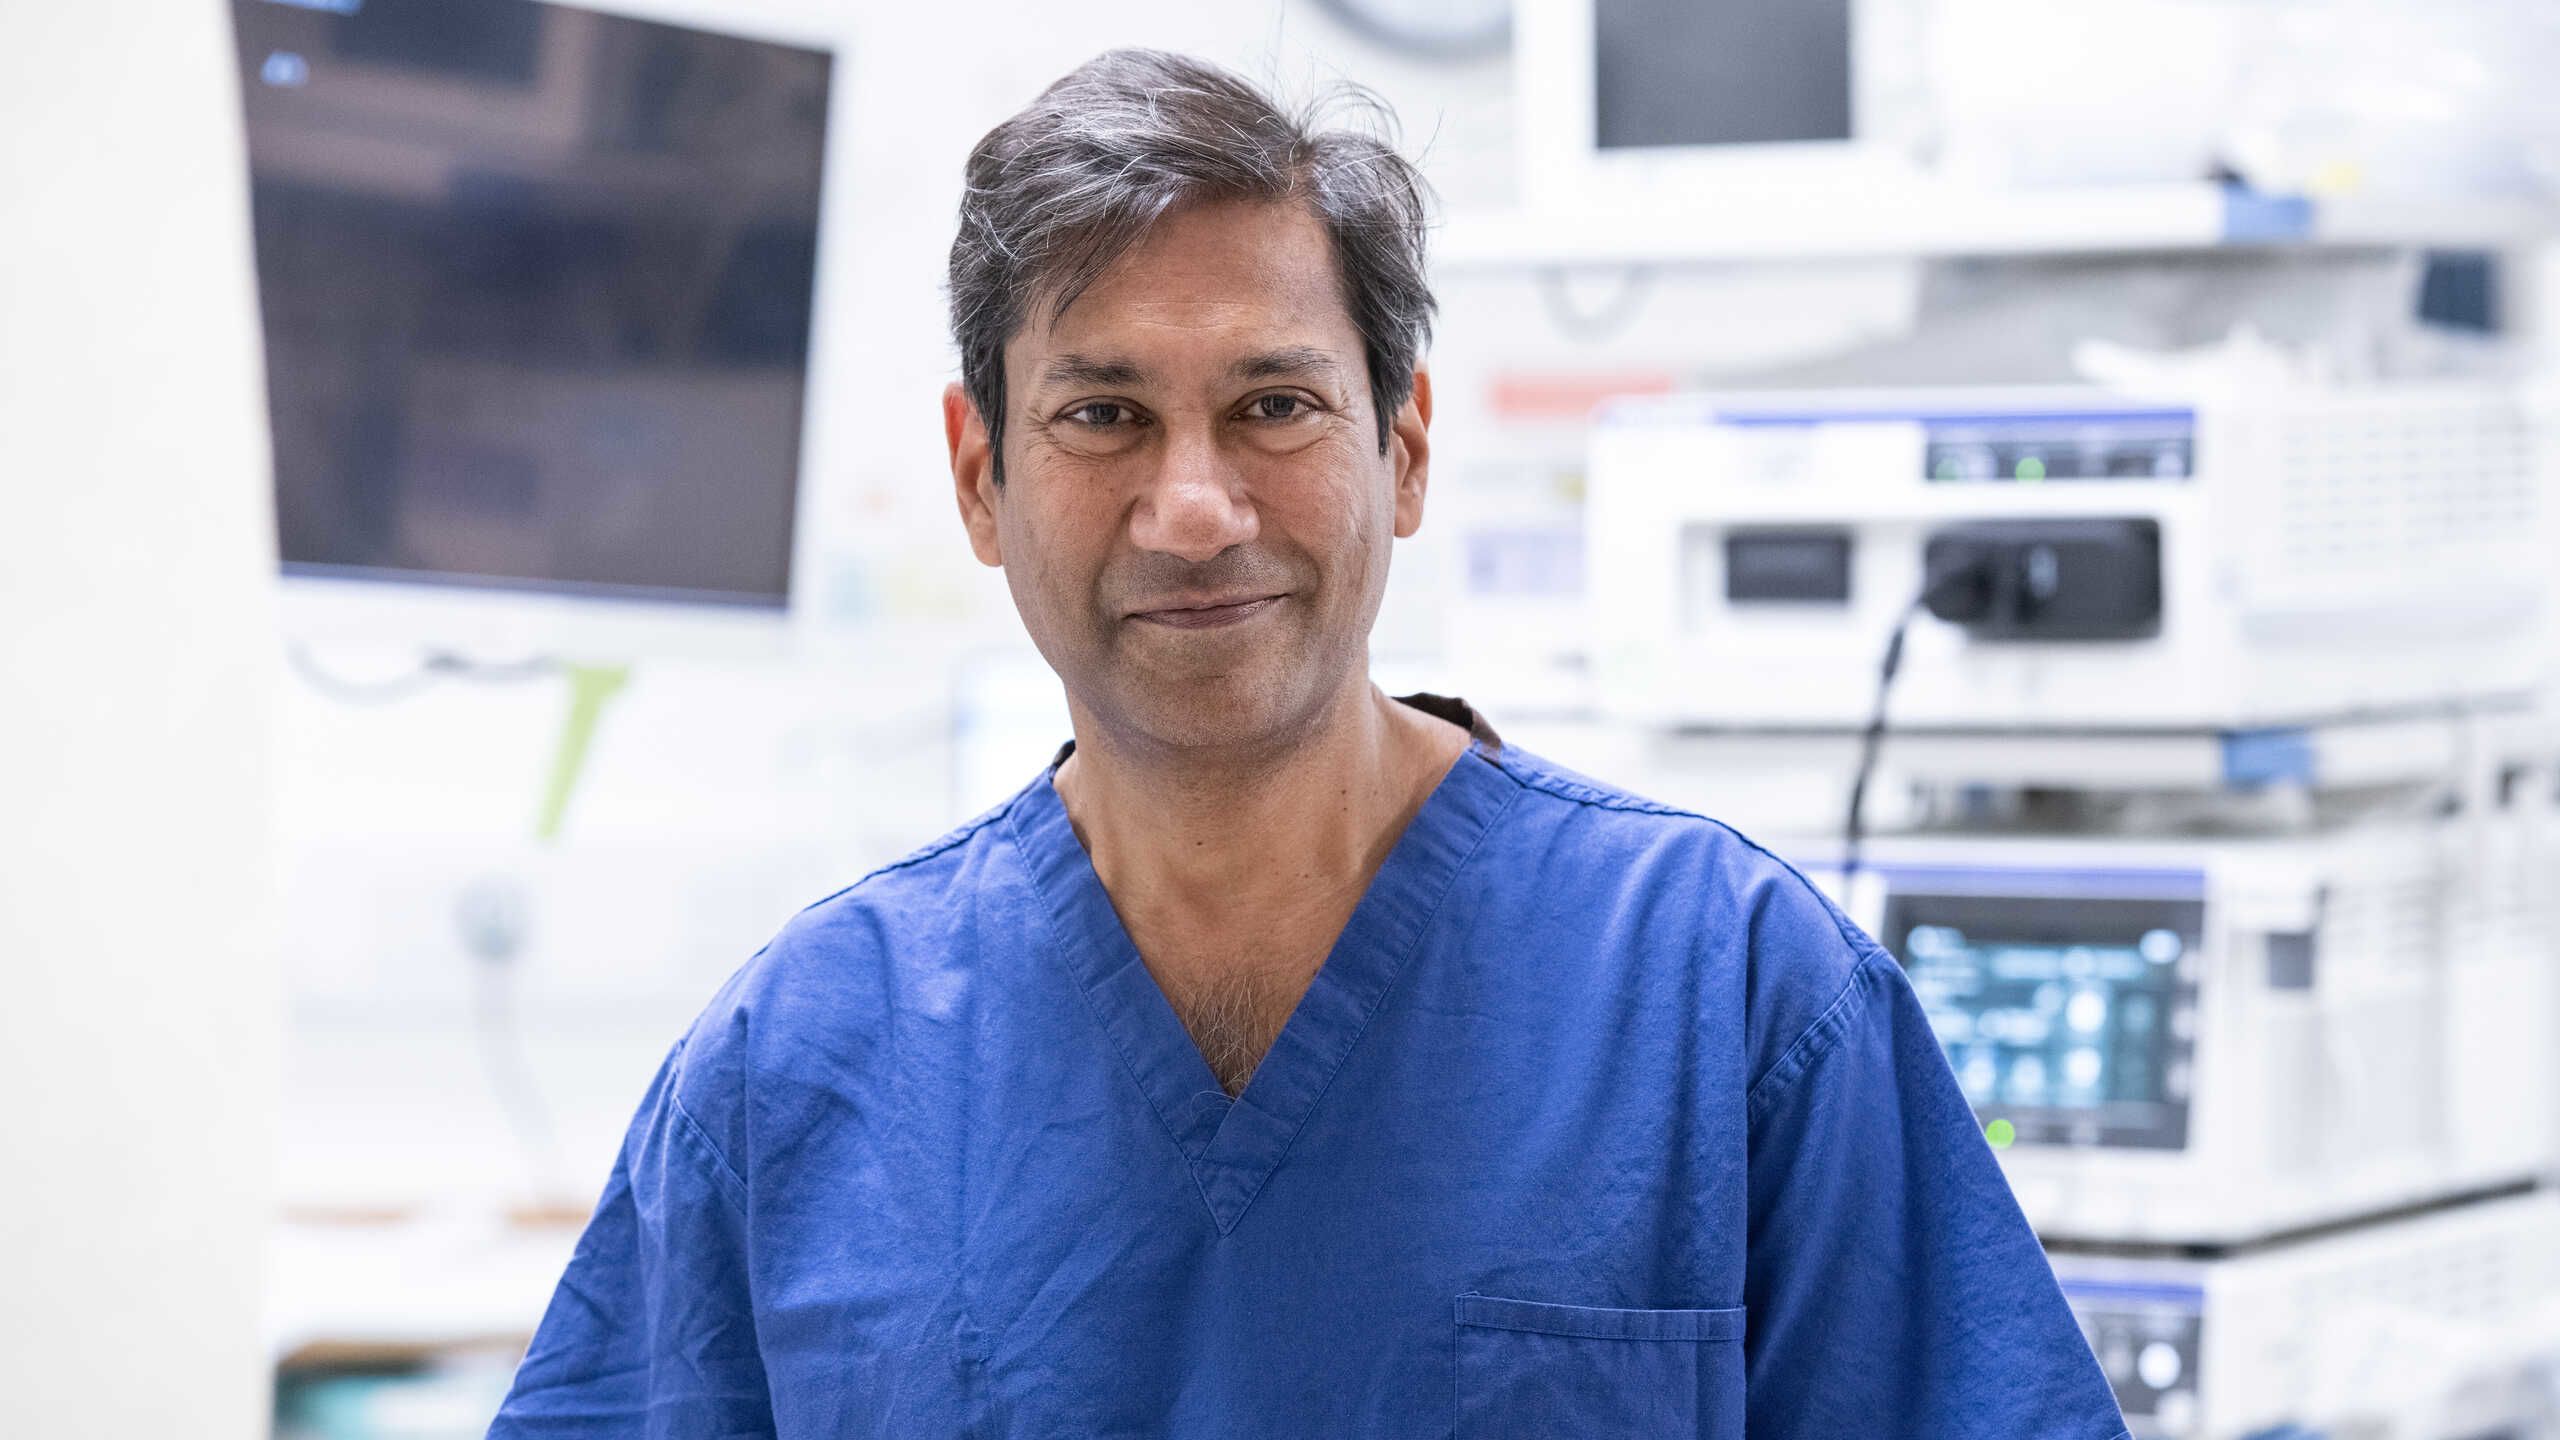 Professor Pallav Shah at Chelsea and Westminster Hospital smiling 